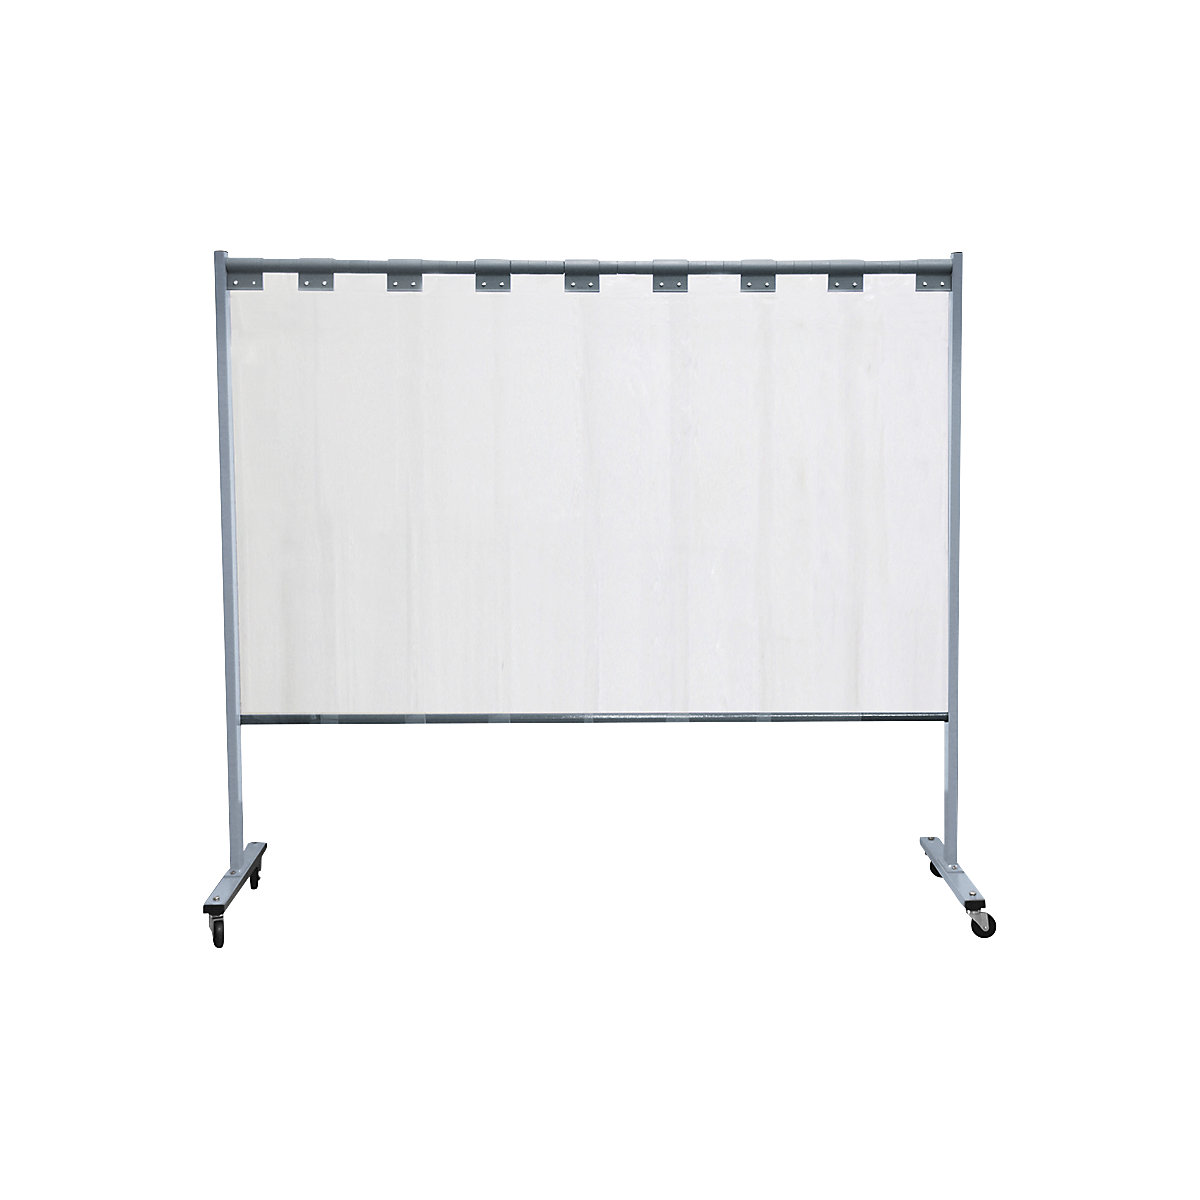 Mobile welding protection screen, single unit design, HxW 1900 x 2100 mm, with lamellar curtain, transparent